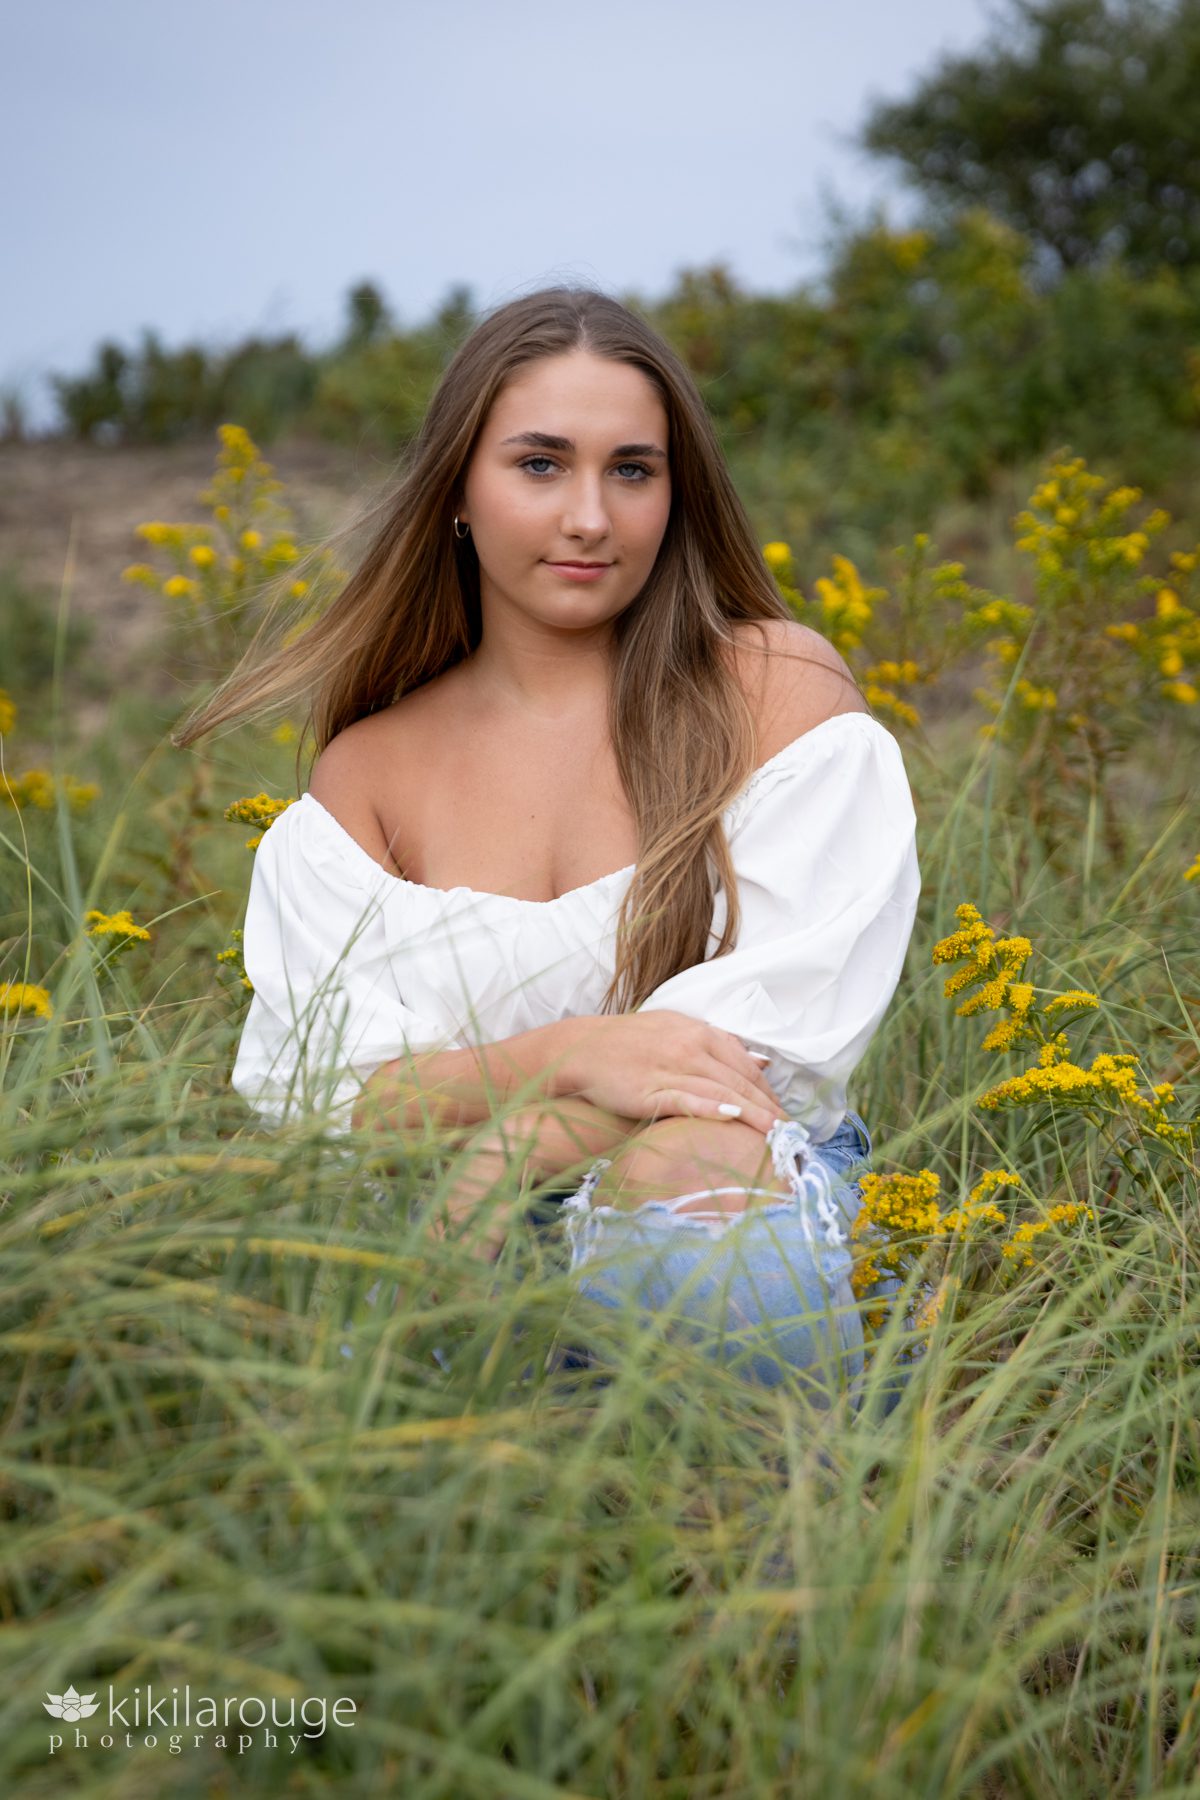 Triton Senior Portrait Girl in Jeans with white top tied in back at beach sitting in dunes with goldenrods